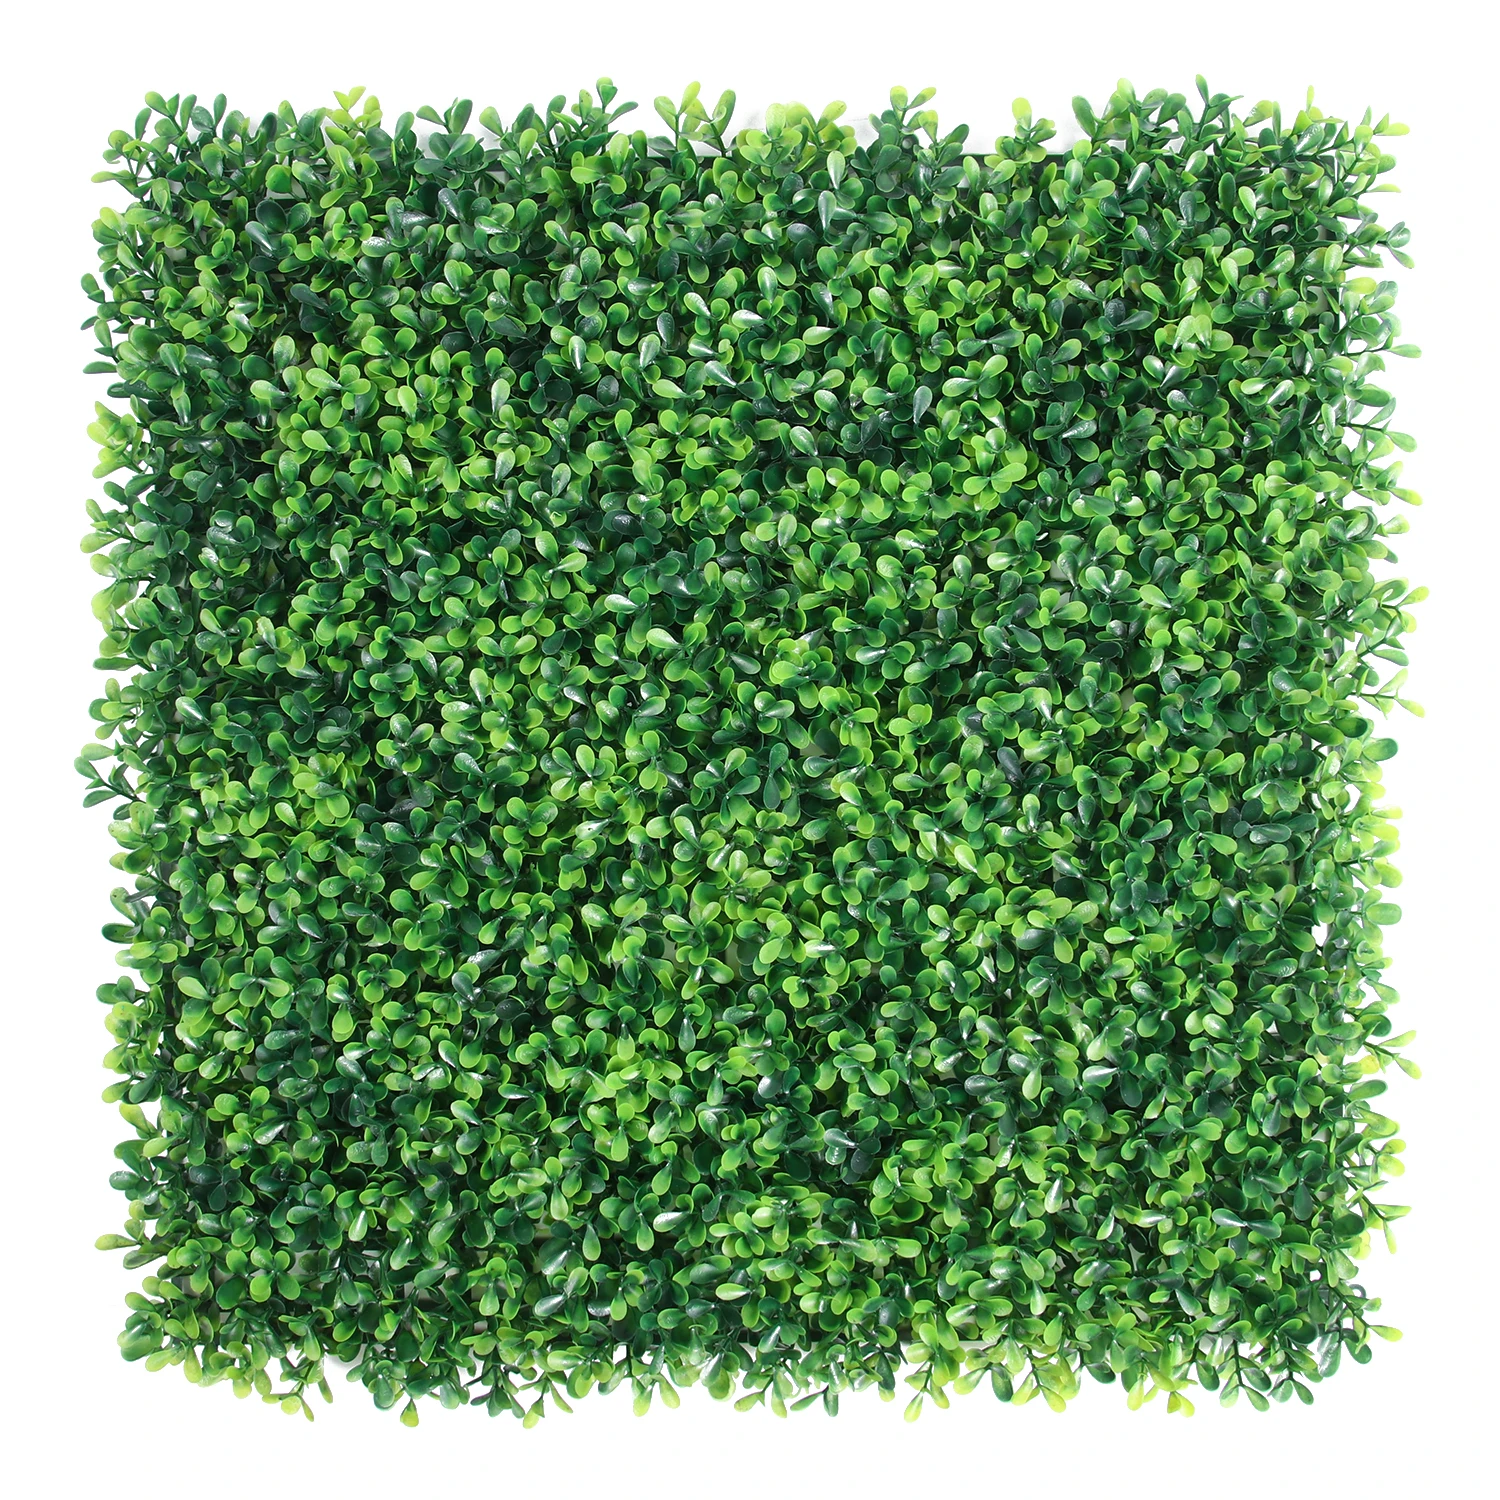 

Handmade Outdoor UV Resisted PE Faux Hedge Rolls Wall Artificial Boxwood Green panels for Vertical Garden